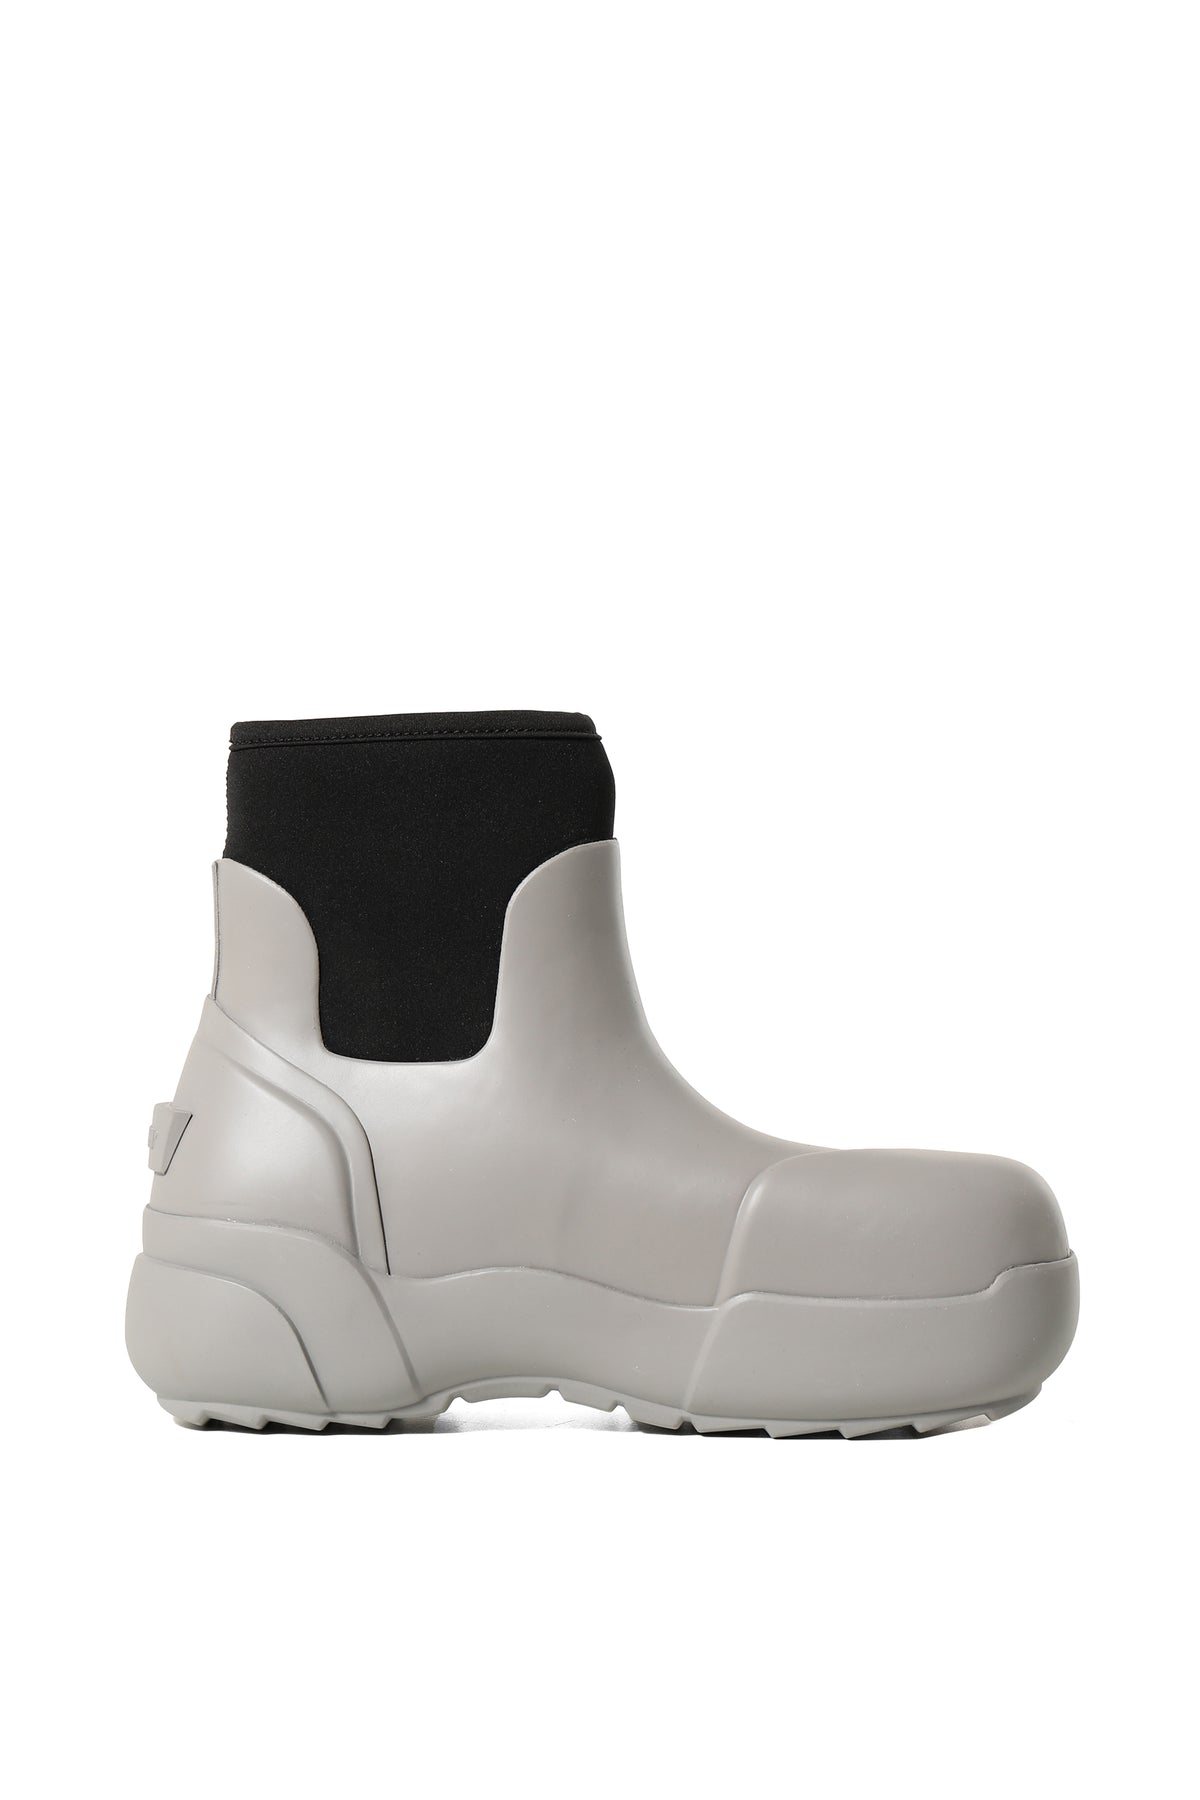 RUBBER BOOT / GRY BLK